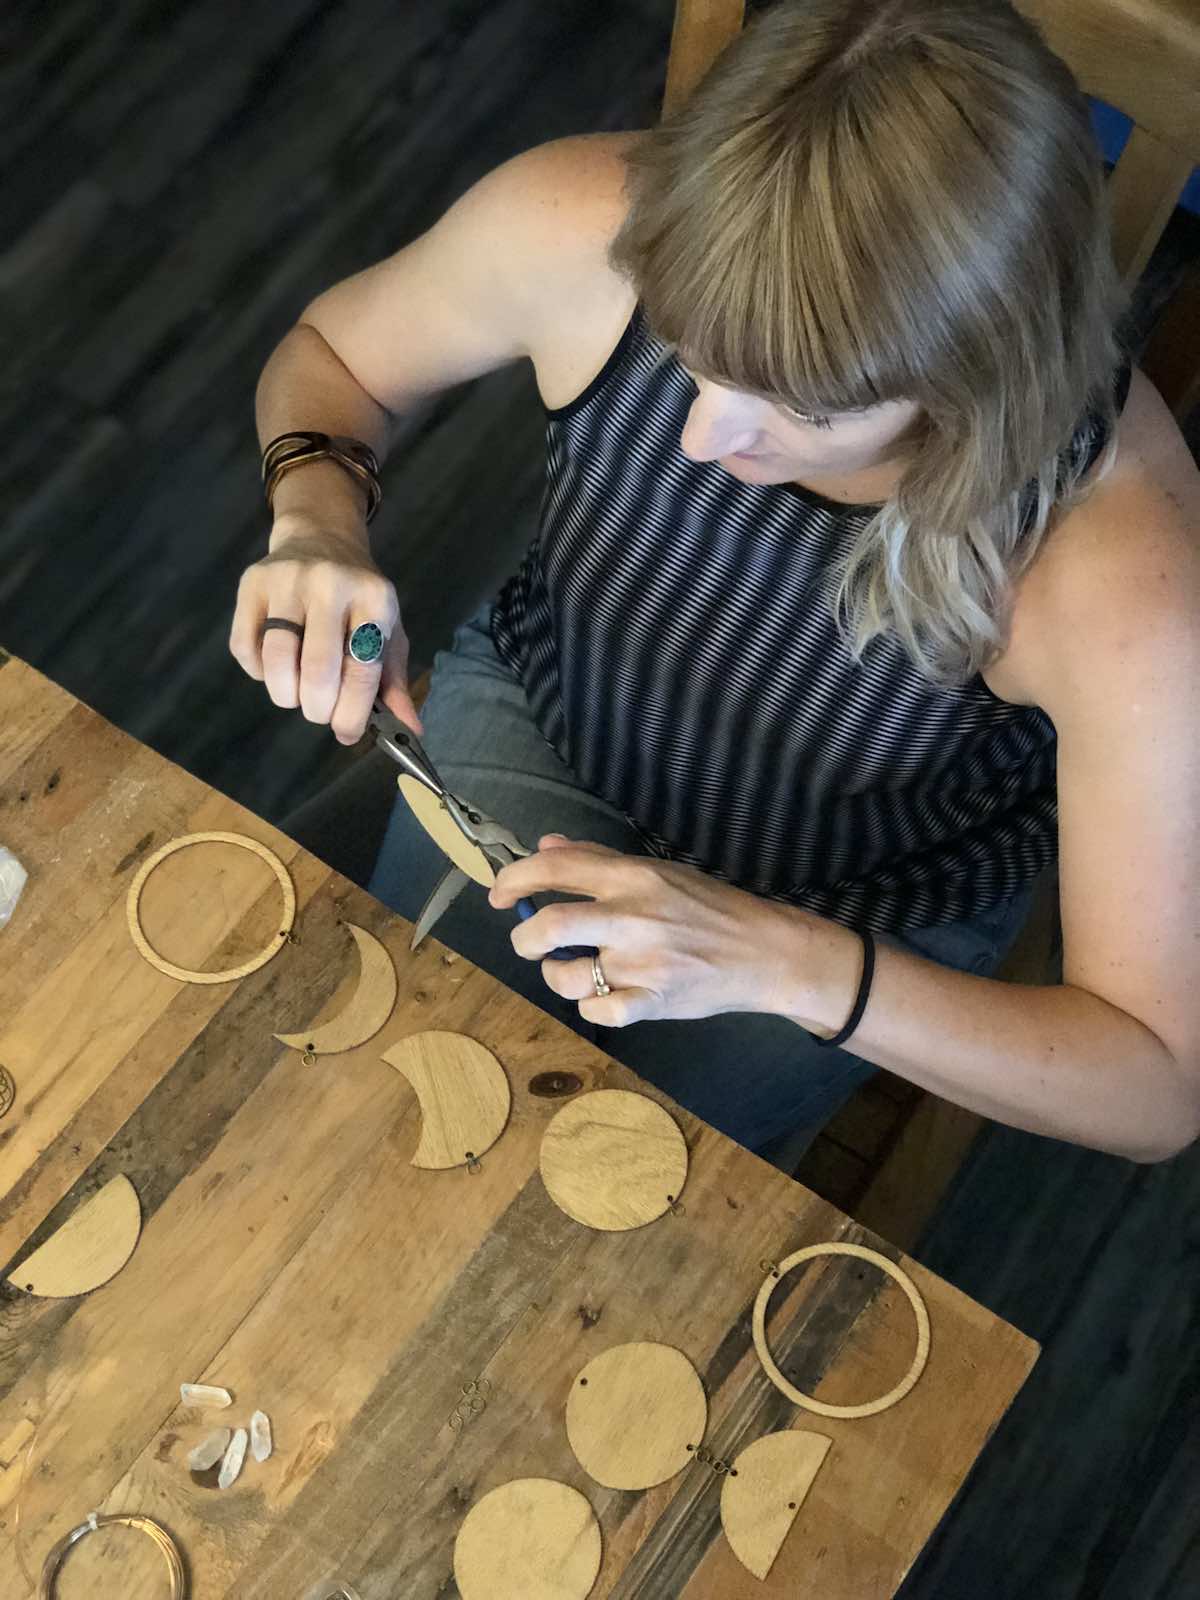 Molly Croteau makes hand-made, sustainable jewelry and art inspired by nature, in Costa Mesa, California. (photo: Samantha Chagollan)